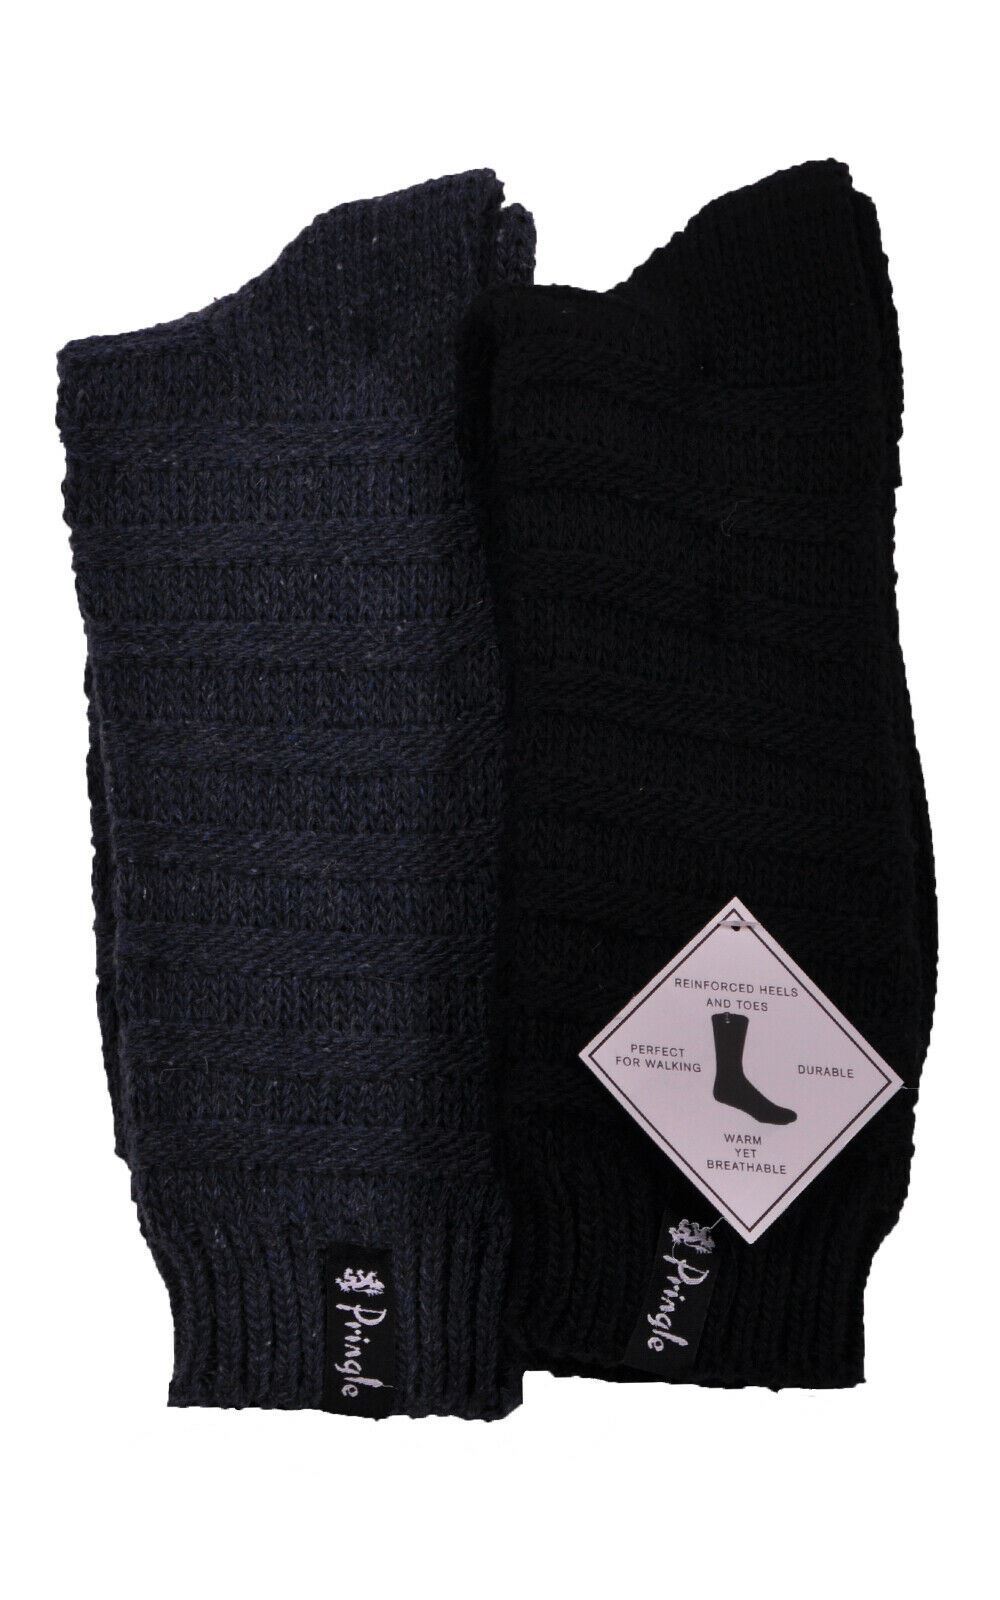 Picture of Pringle Boot Sock L9201